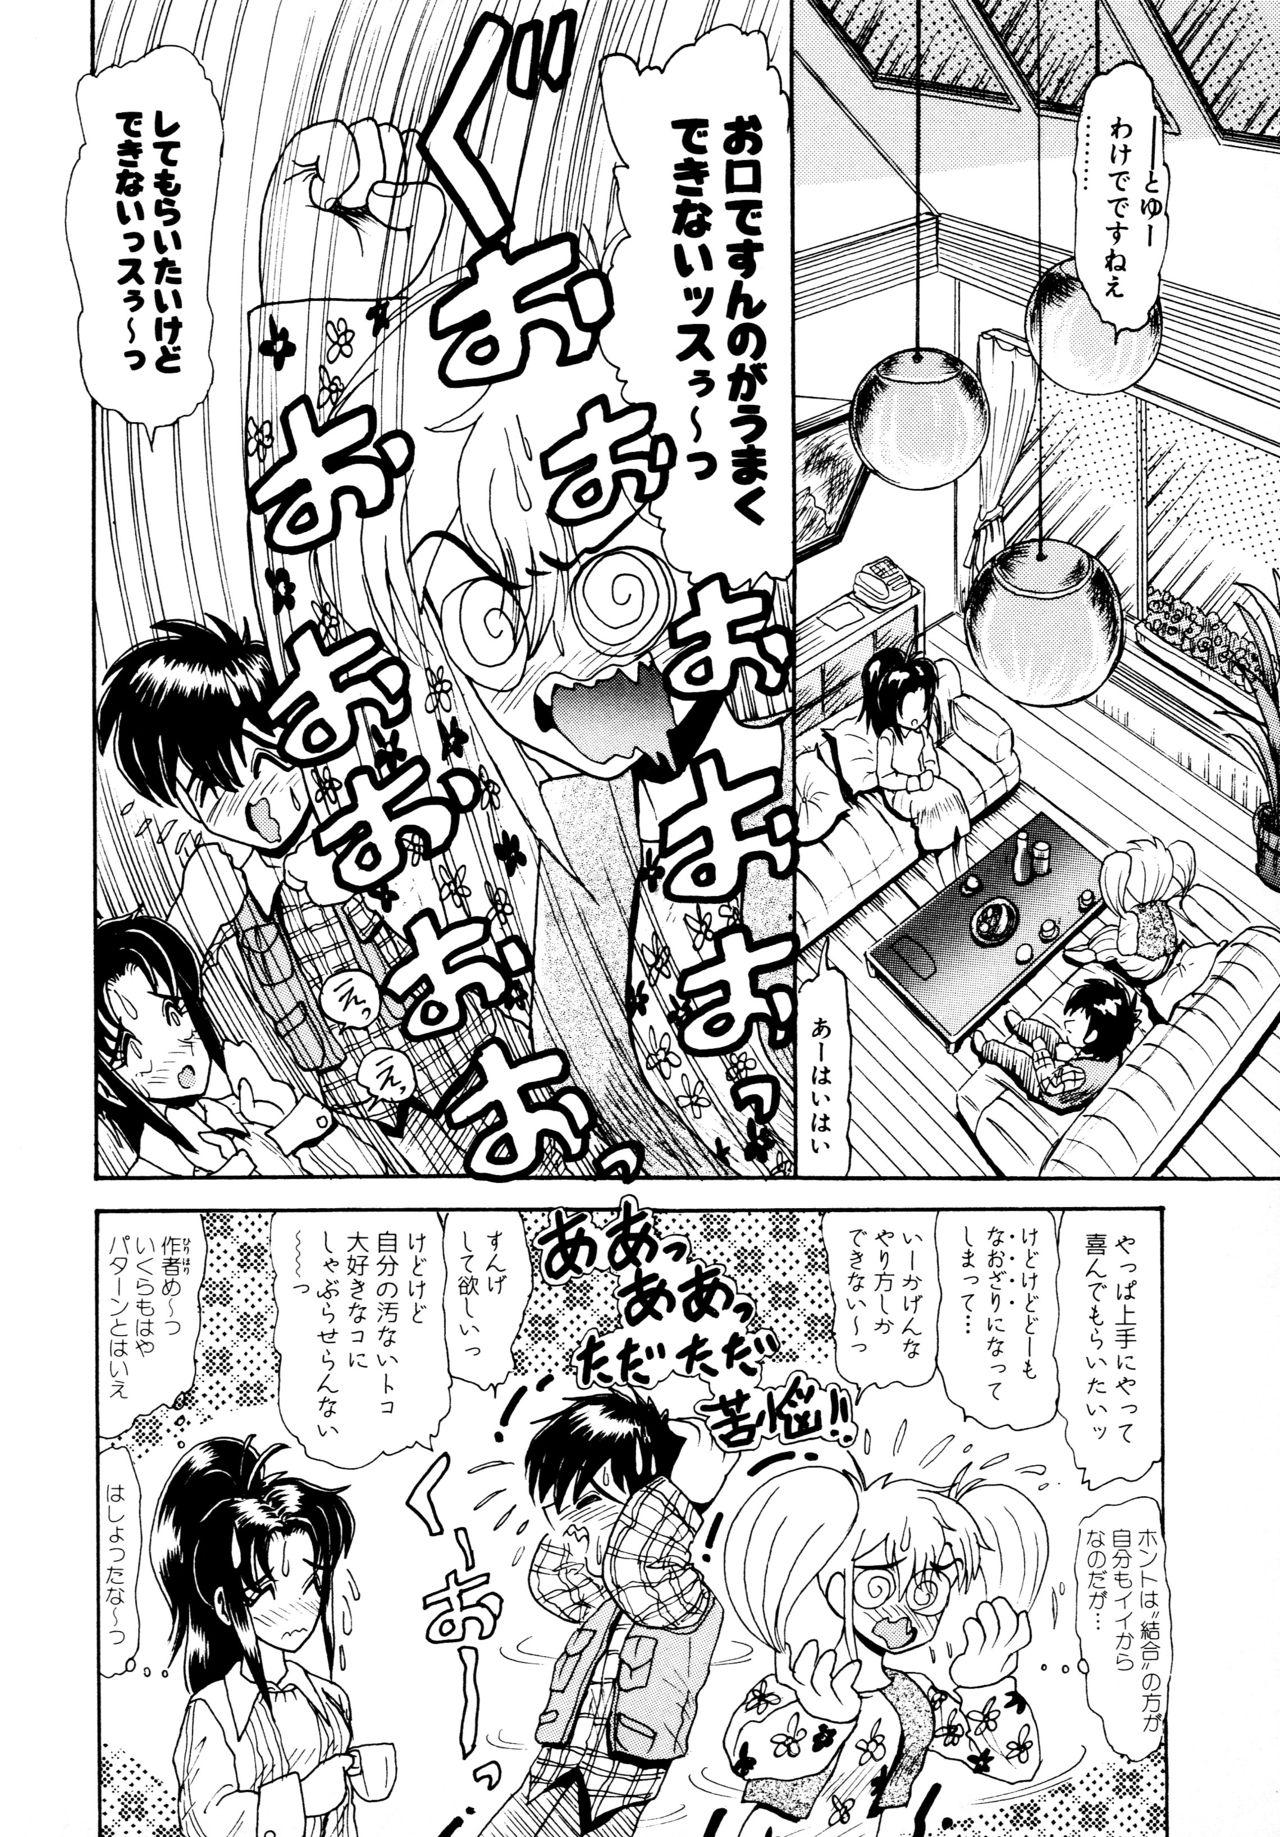 Bucetinha 毎日がおきらく Oldyoung - Page 9